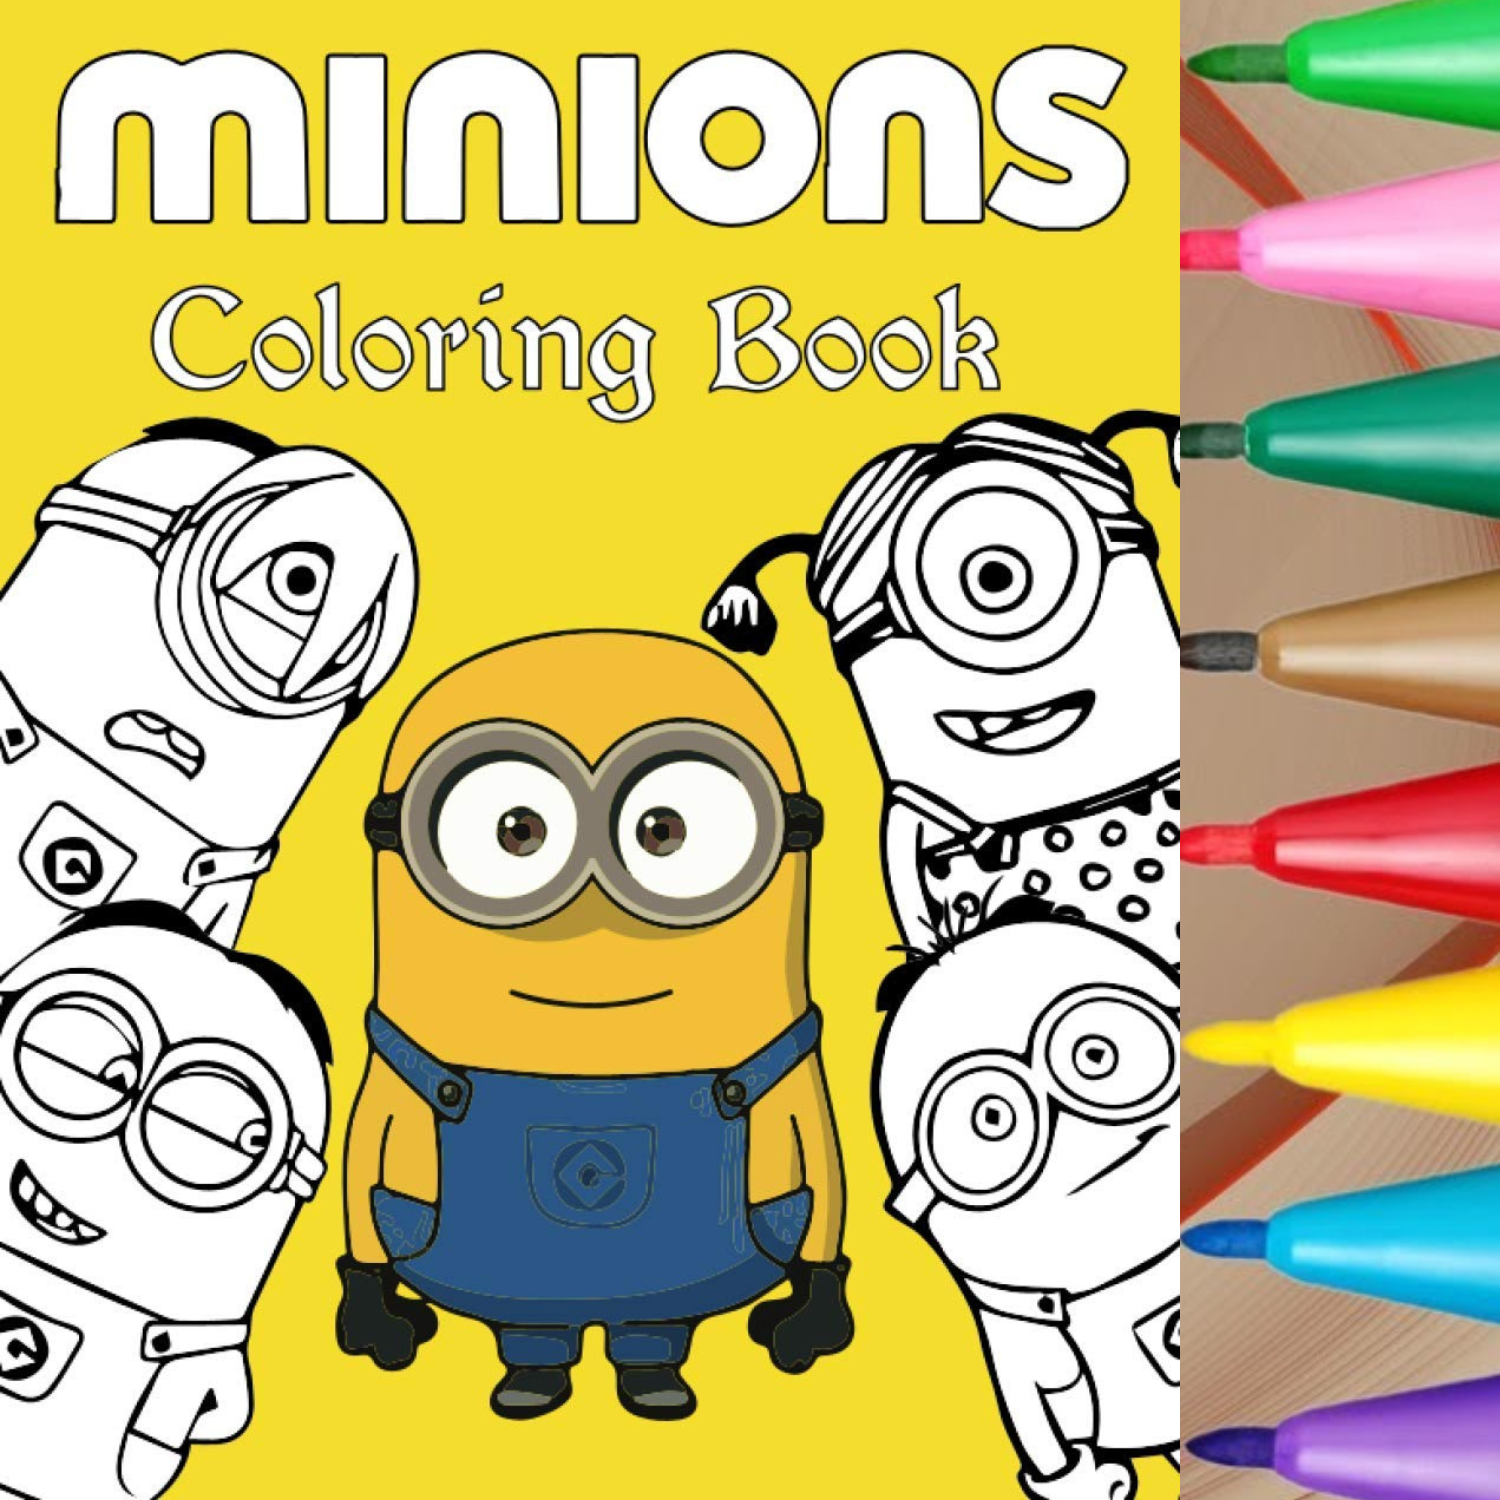 Minions coloring bookkeep your child entertained with our printable minions col made by teachers